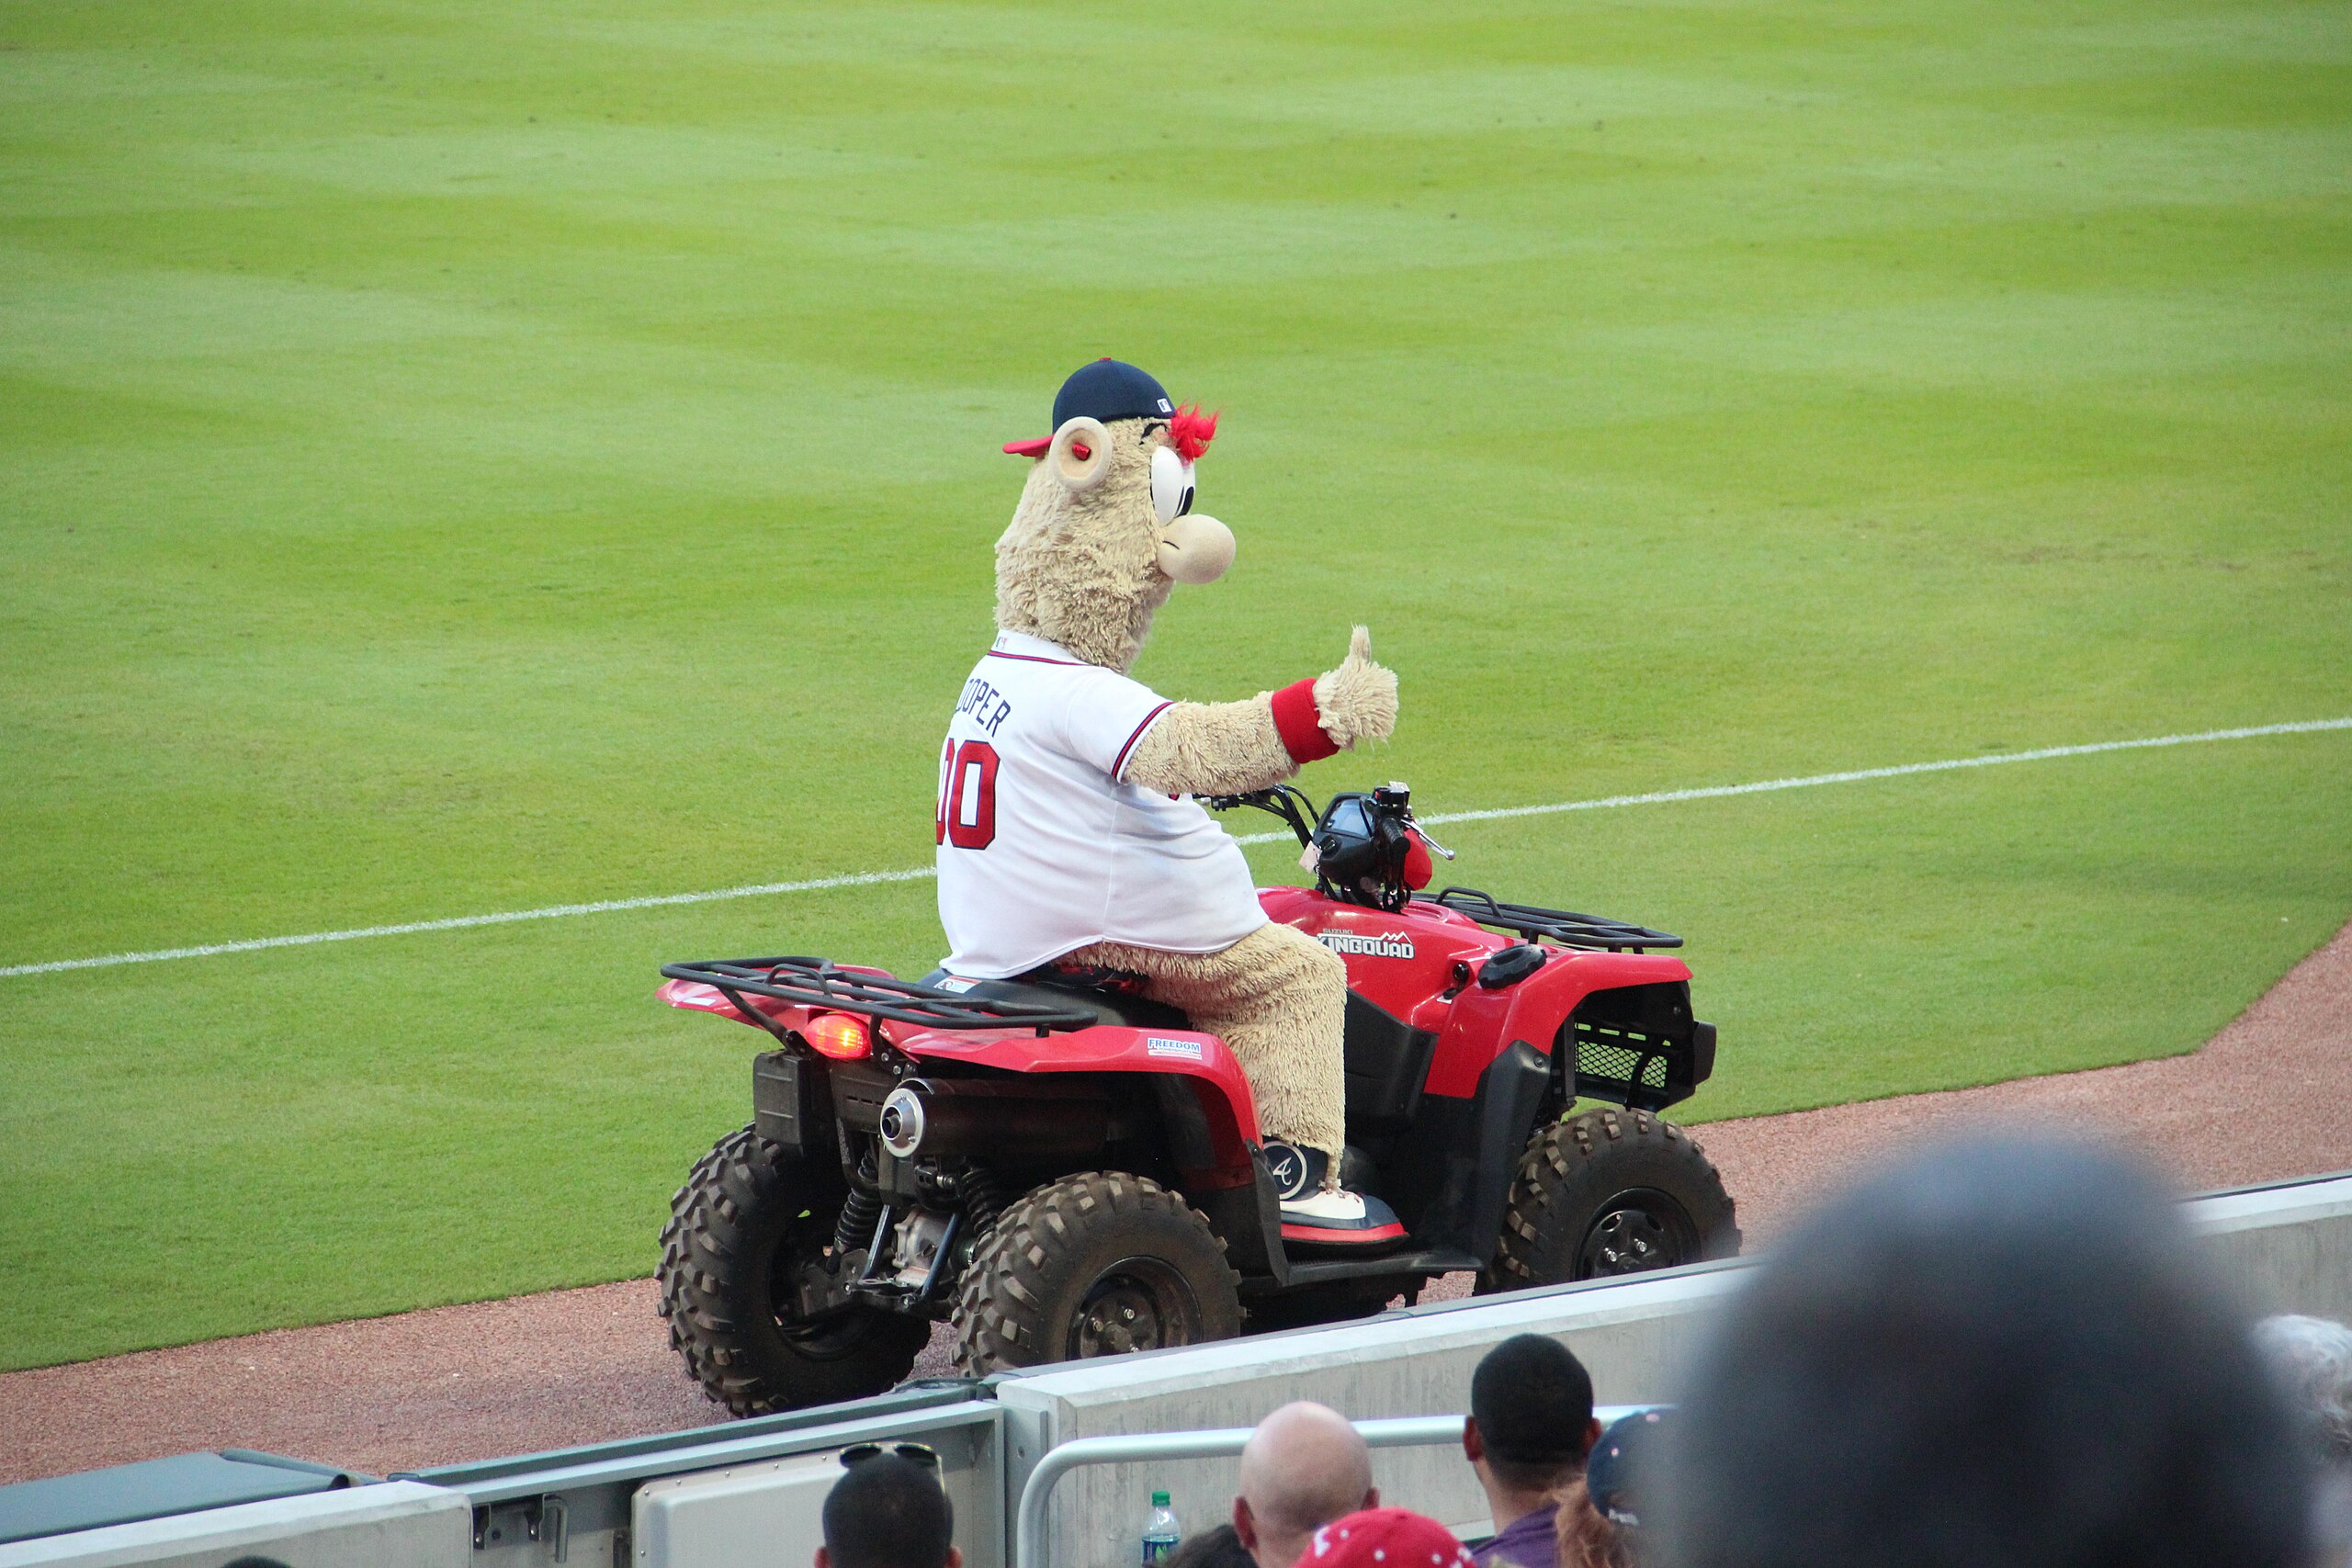 Braves mascot Blooper hilariously failed to jumpt through two tables